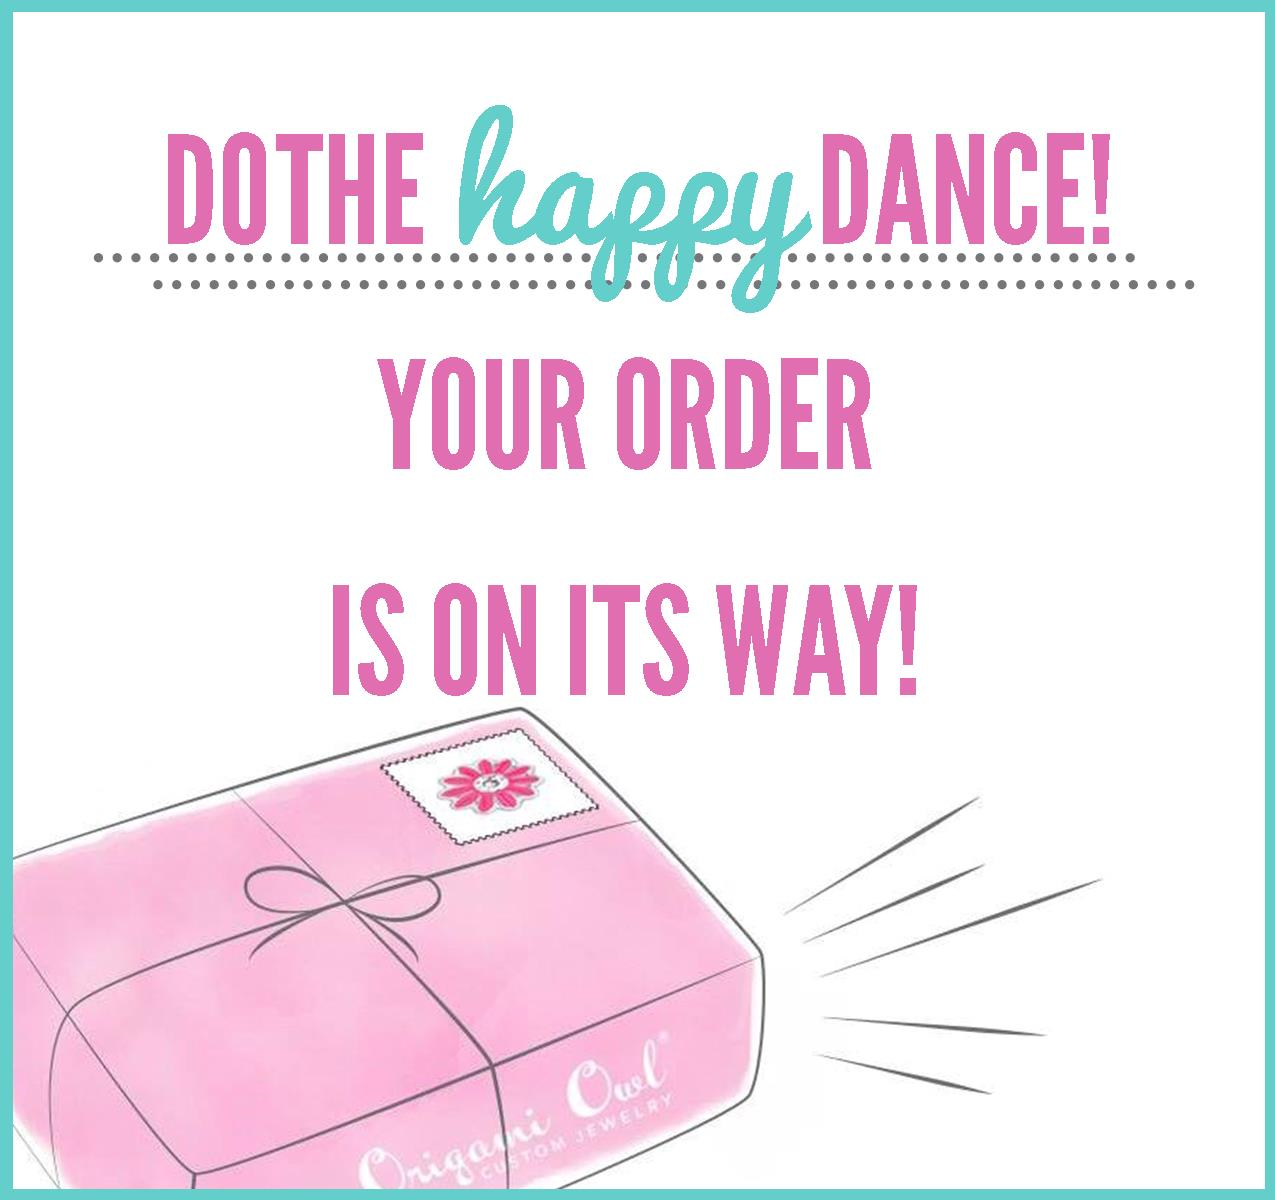 Origami Owl Order Status Its Time To Send A Presentable Shipping Confirmation Emails Revamp